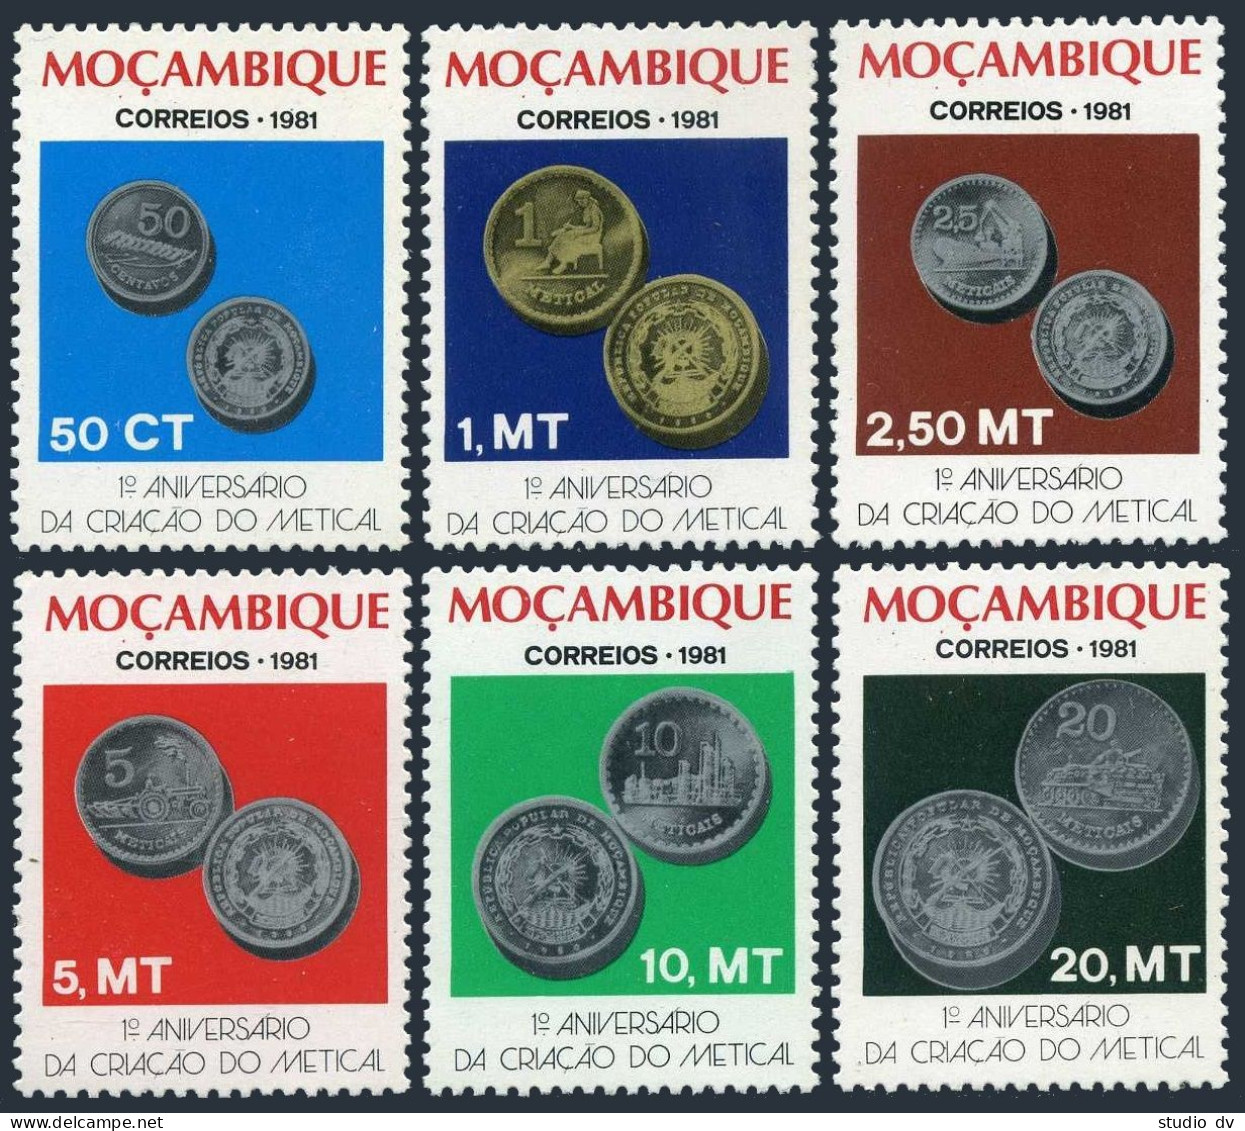 Mozambique 751-756,MNH.Michel 822-827. New Currency,1981.Coins. - Mozambique